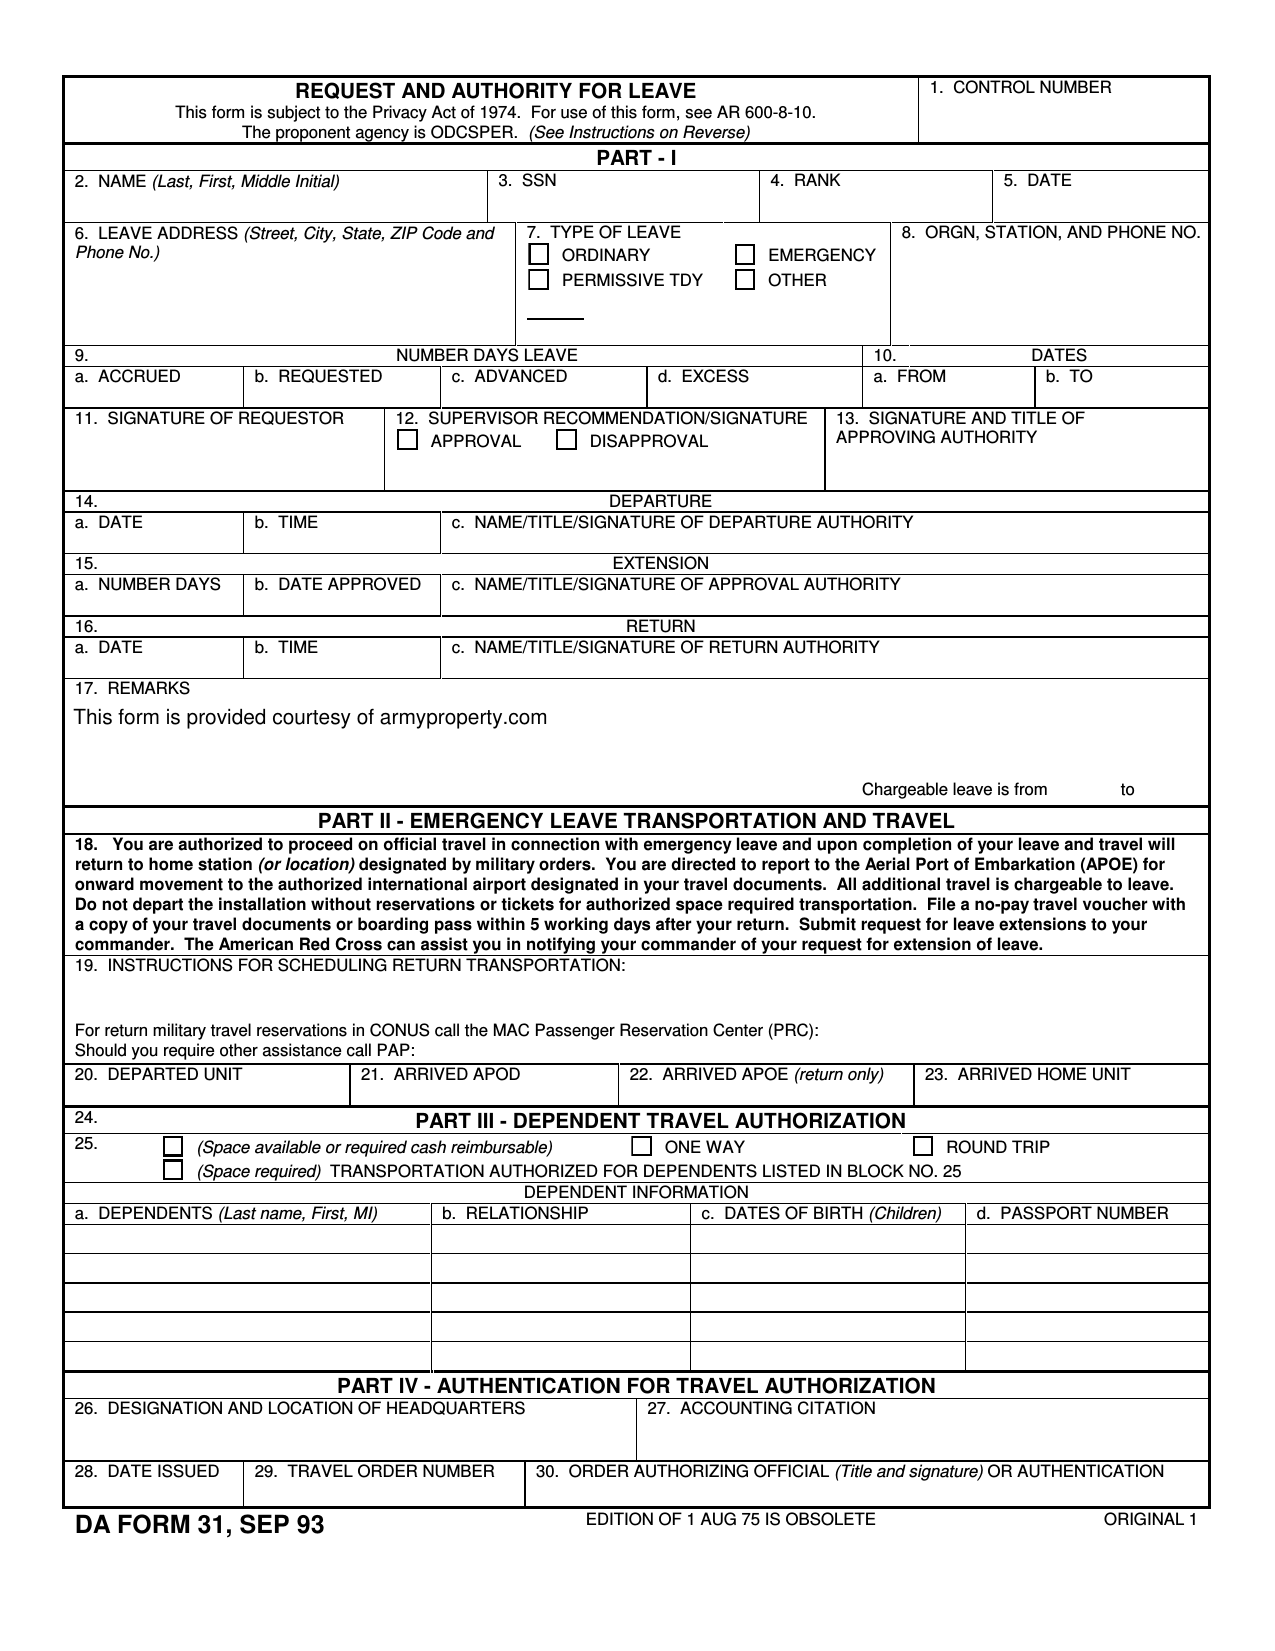 download-da-form-31-request-and-authority-for-leave-pdf-word-xfdl-freedownloads